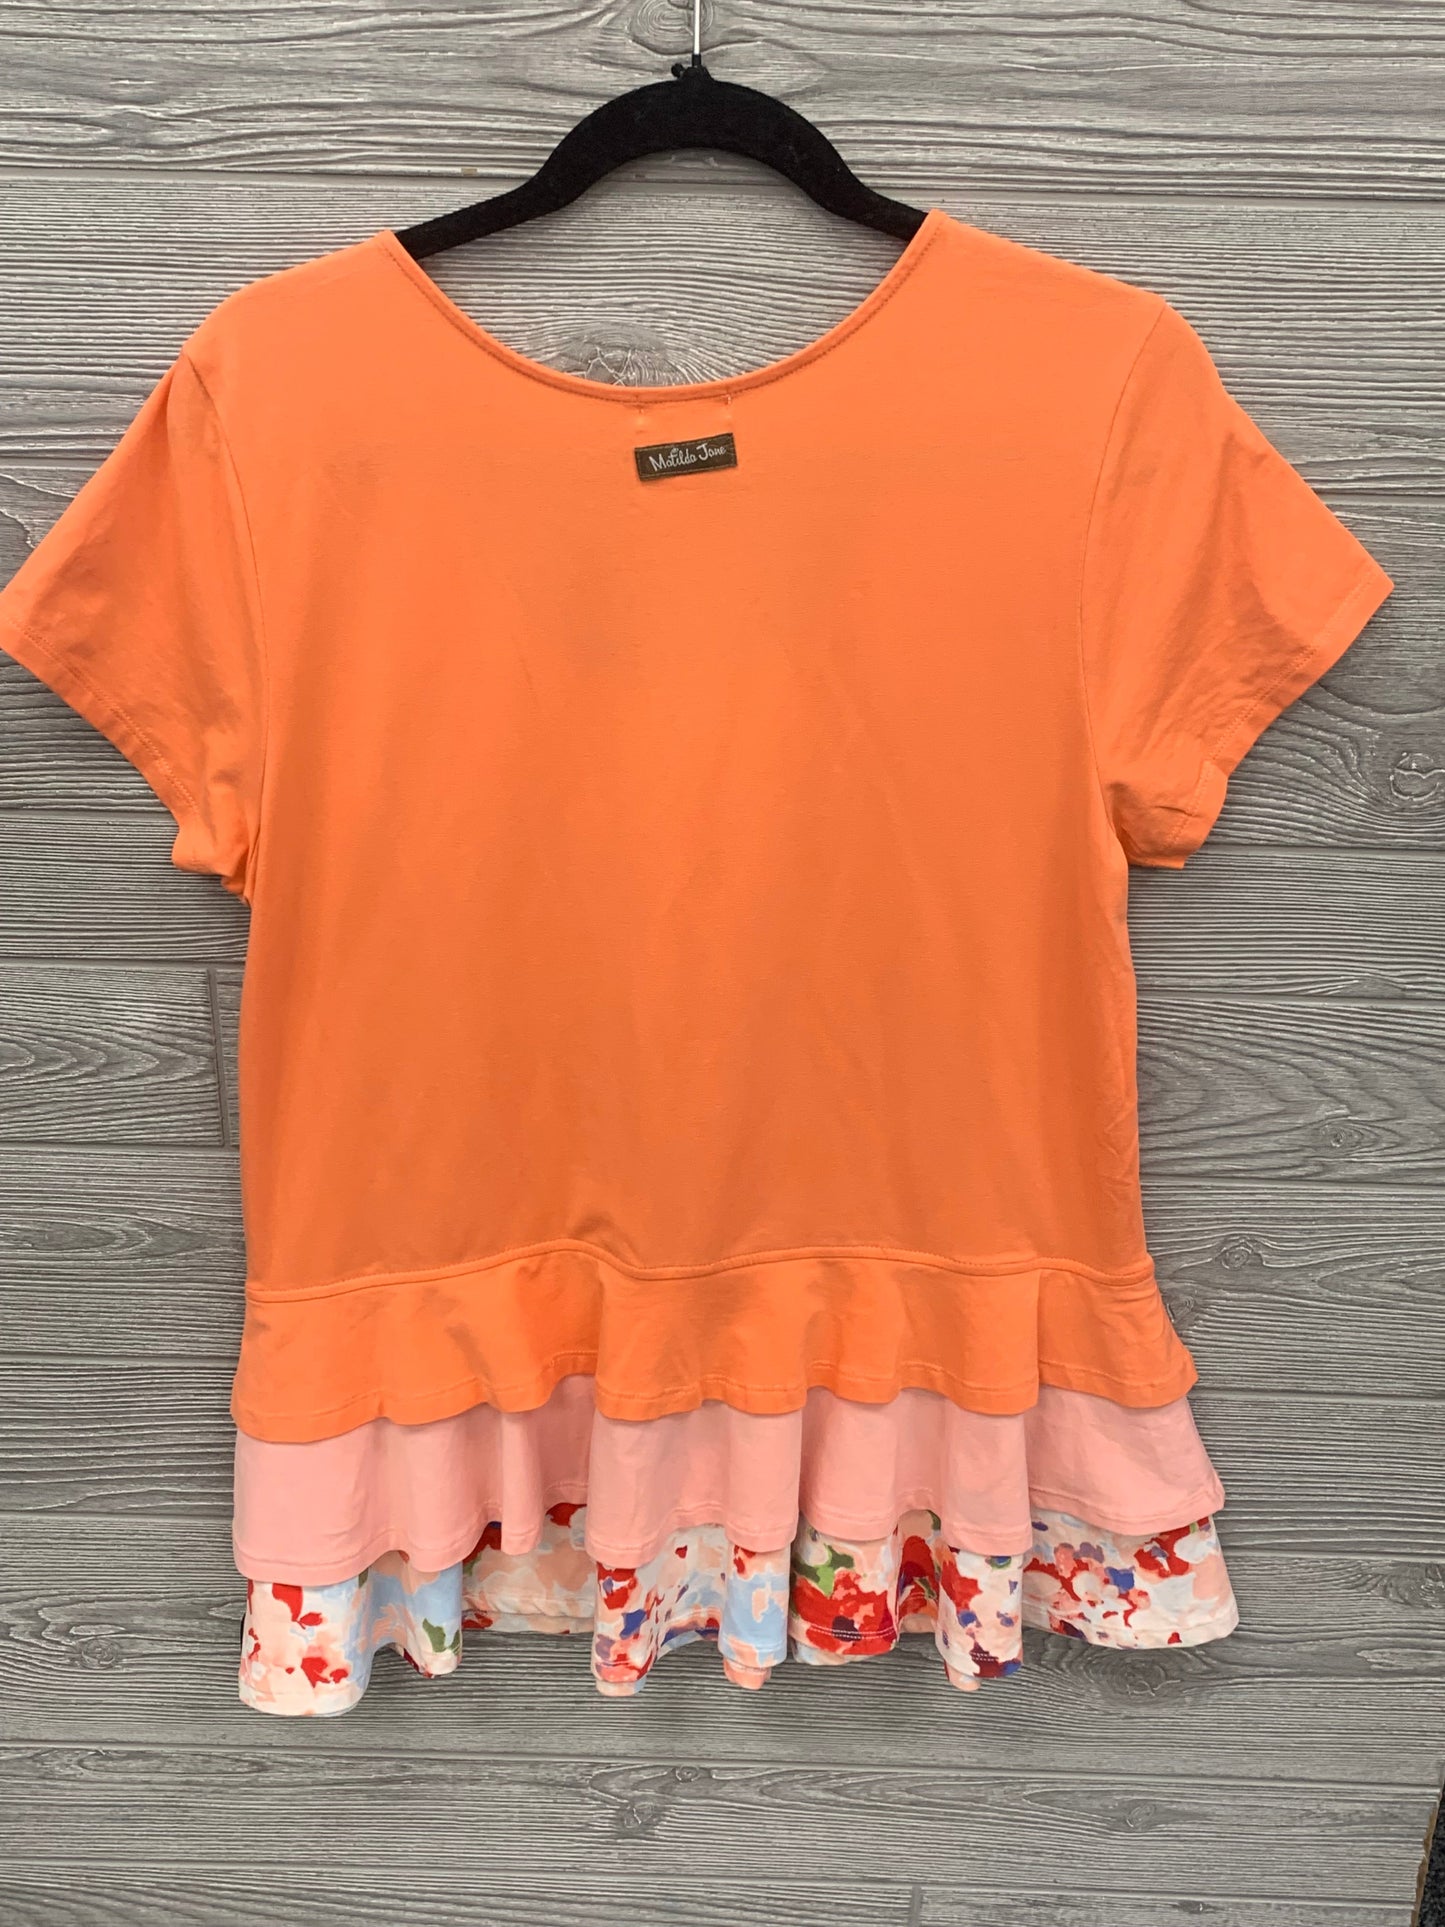 Top Short Sleeve By Matilda Jane  Size: L